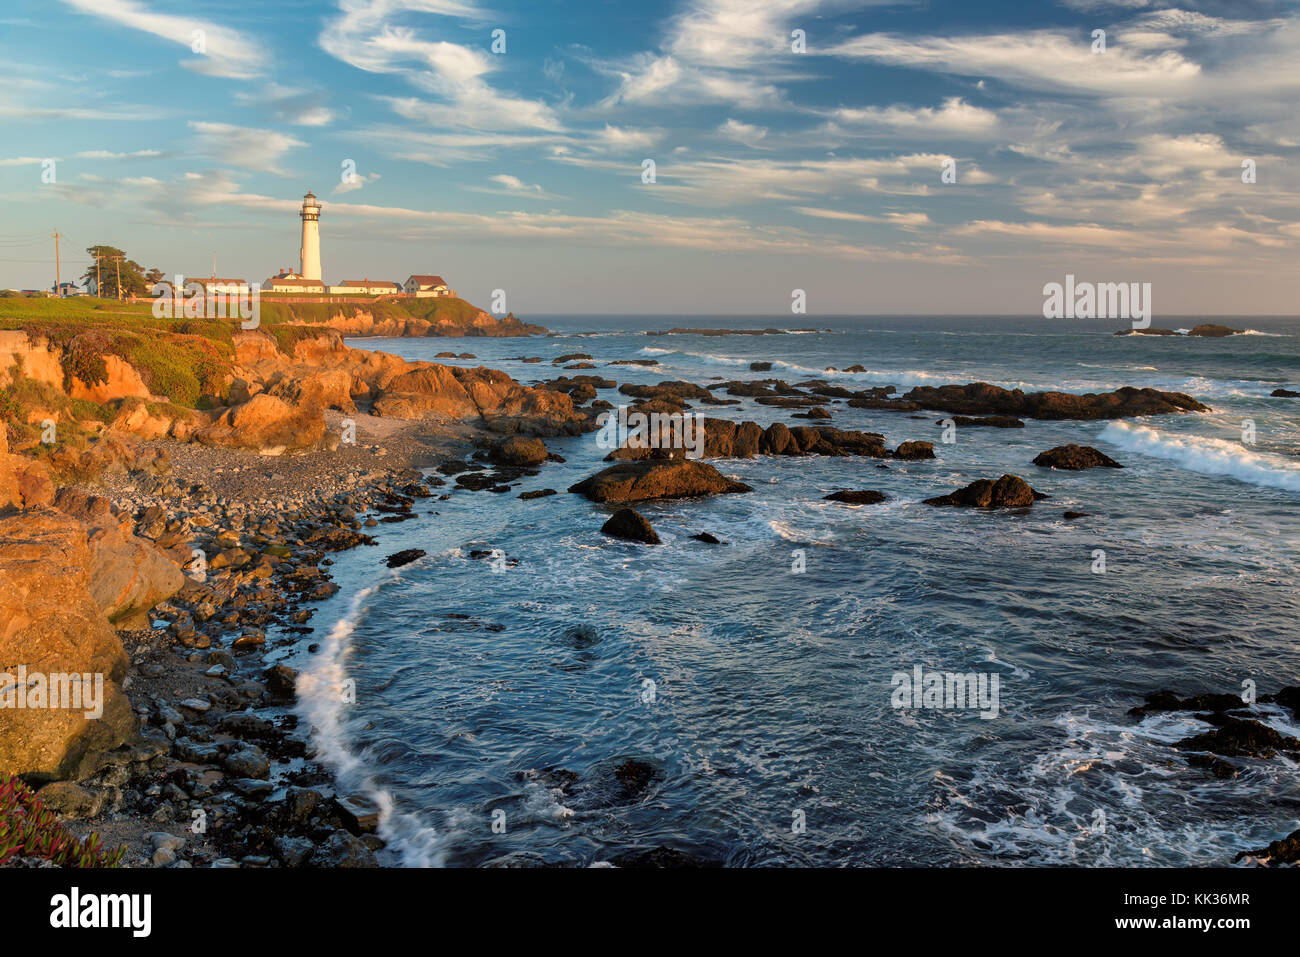 Oceano Pacifico costa vicino a Pigeon Point lighthouse, California Foto Stock